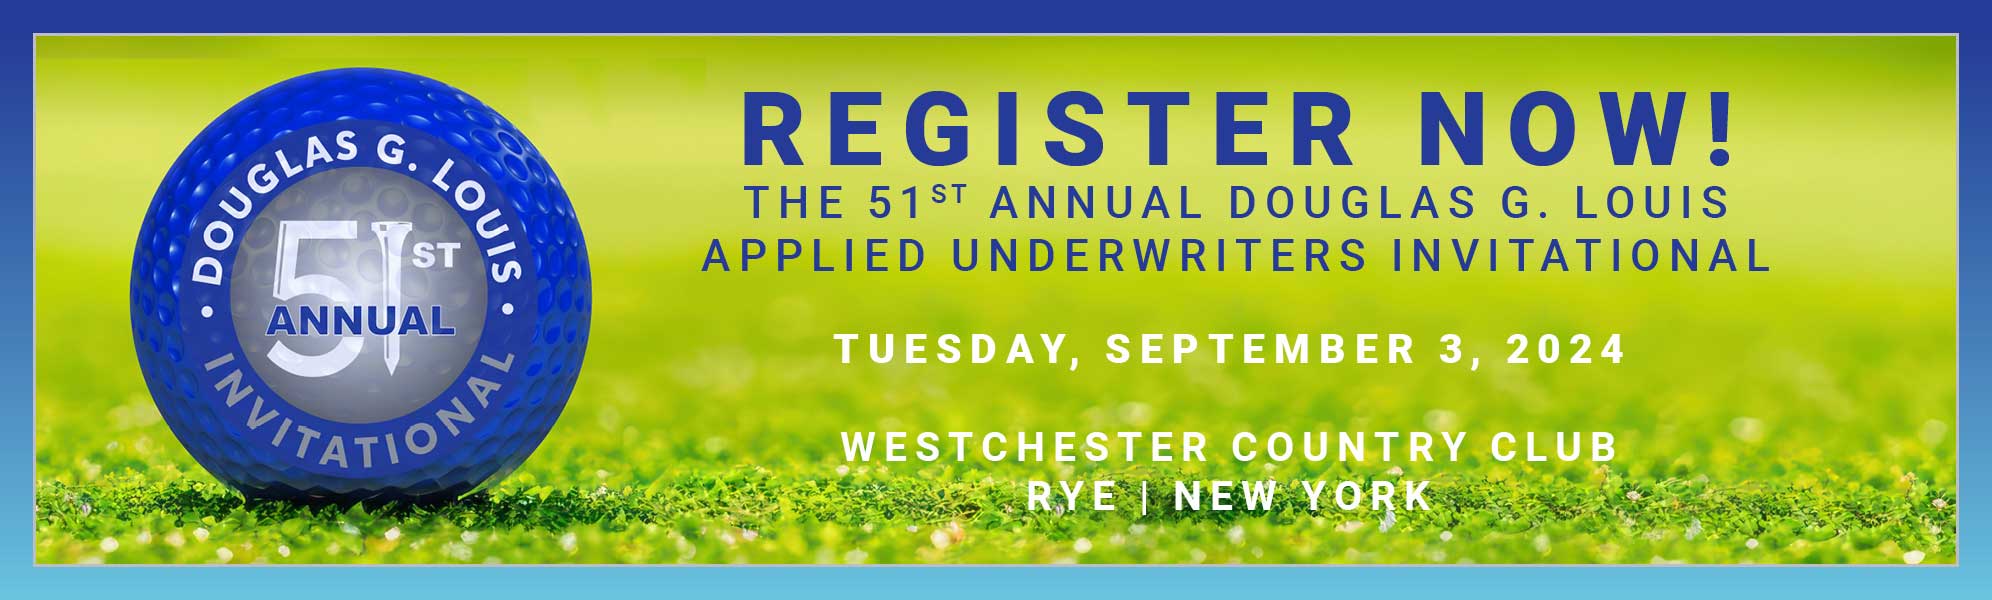 REGISTER NOW! THE 51ST ANNUAL DOUGLAS G. LOUIS APPLIED UNDERWRITERS INVITATIONAL, TUESDAY, SEPTEMBER 3, 2024, WESTCHESTER COUNTRY CLUB
					RYE I NEW YORK